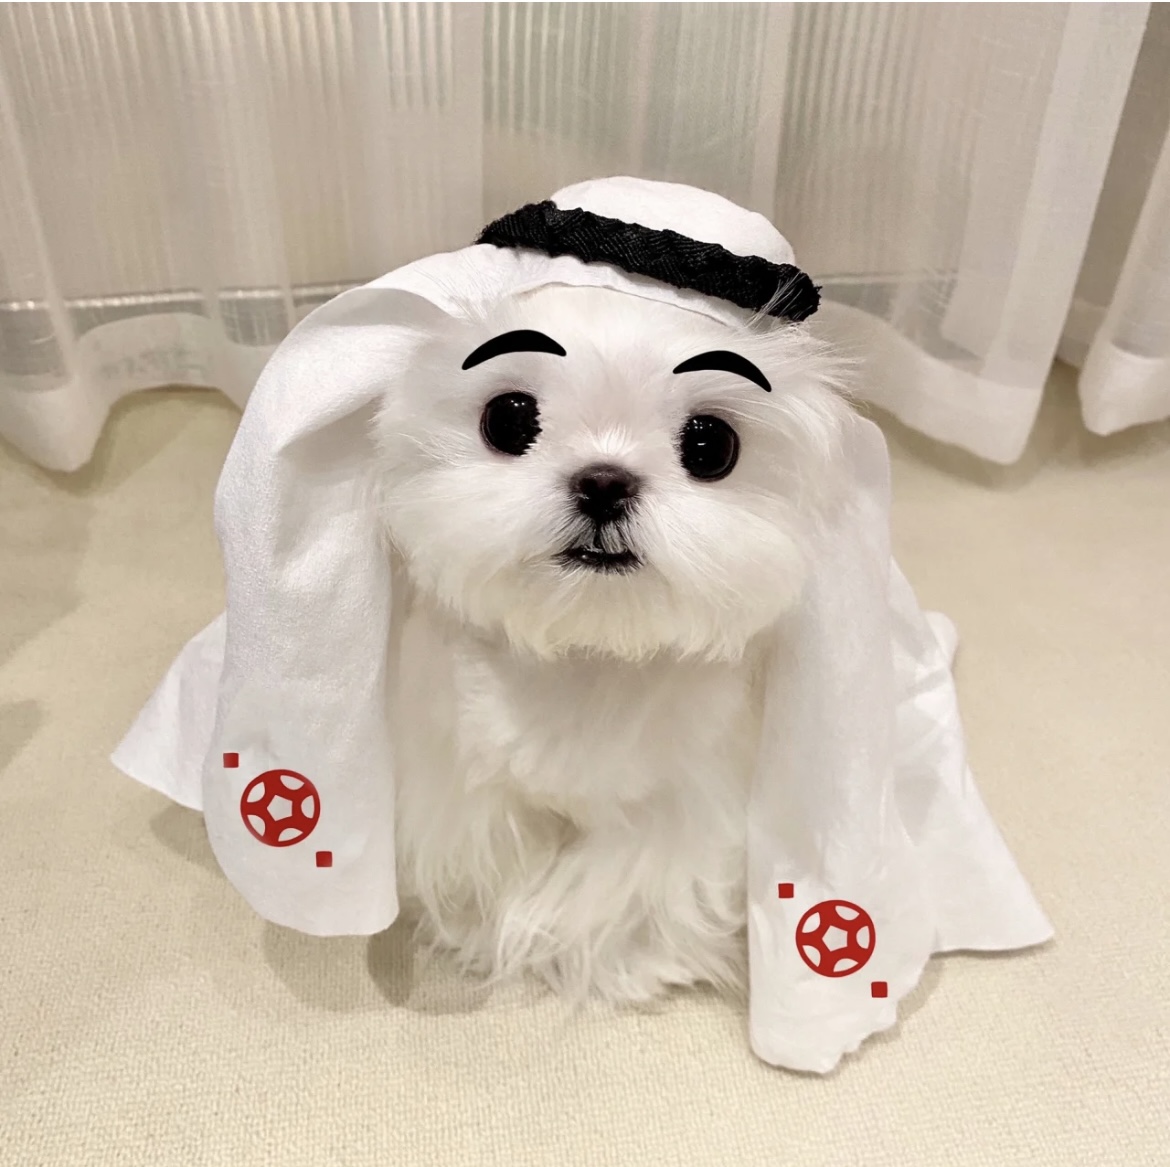 People In China Are Dressing Their Pets Up As La’eeb, The World Cup Mascot, And It’s The Cutest